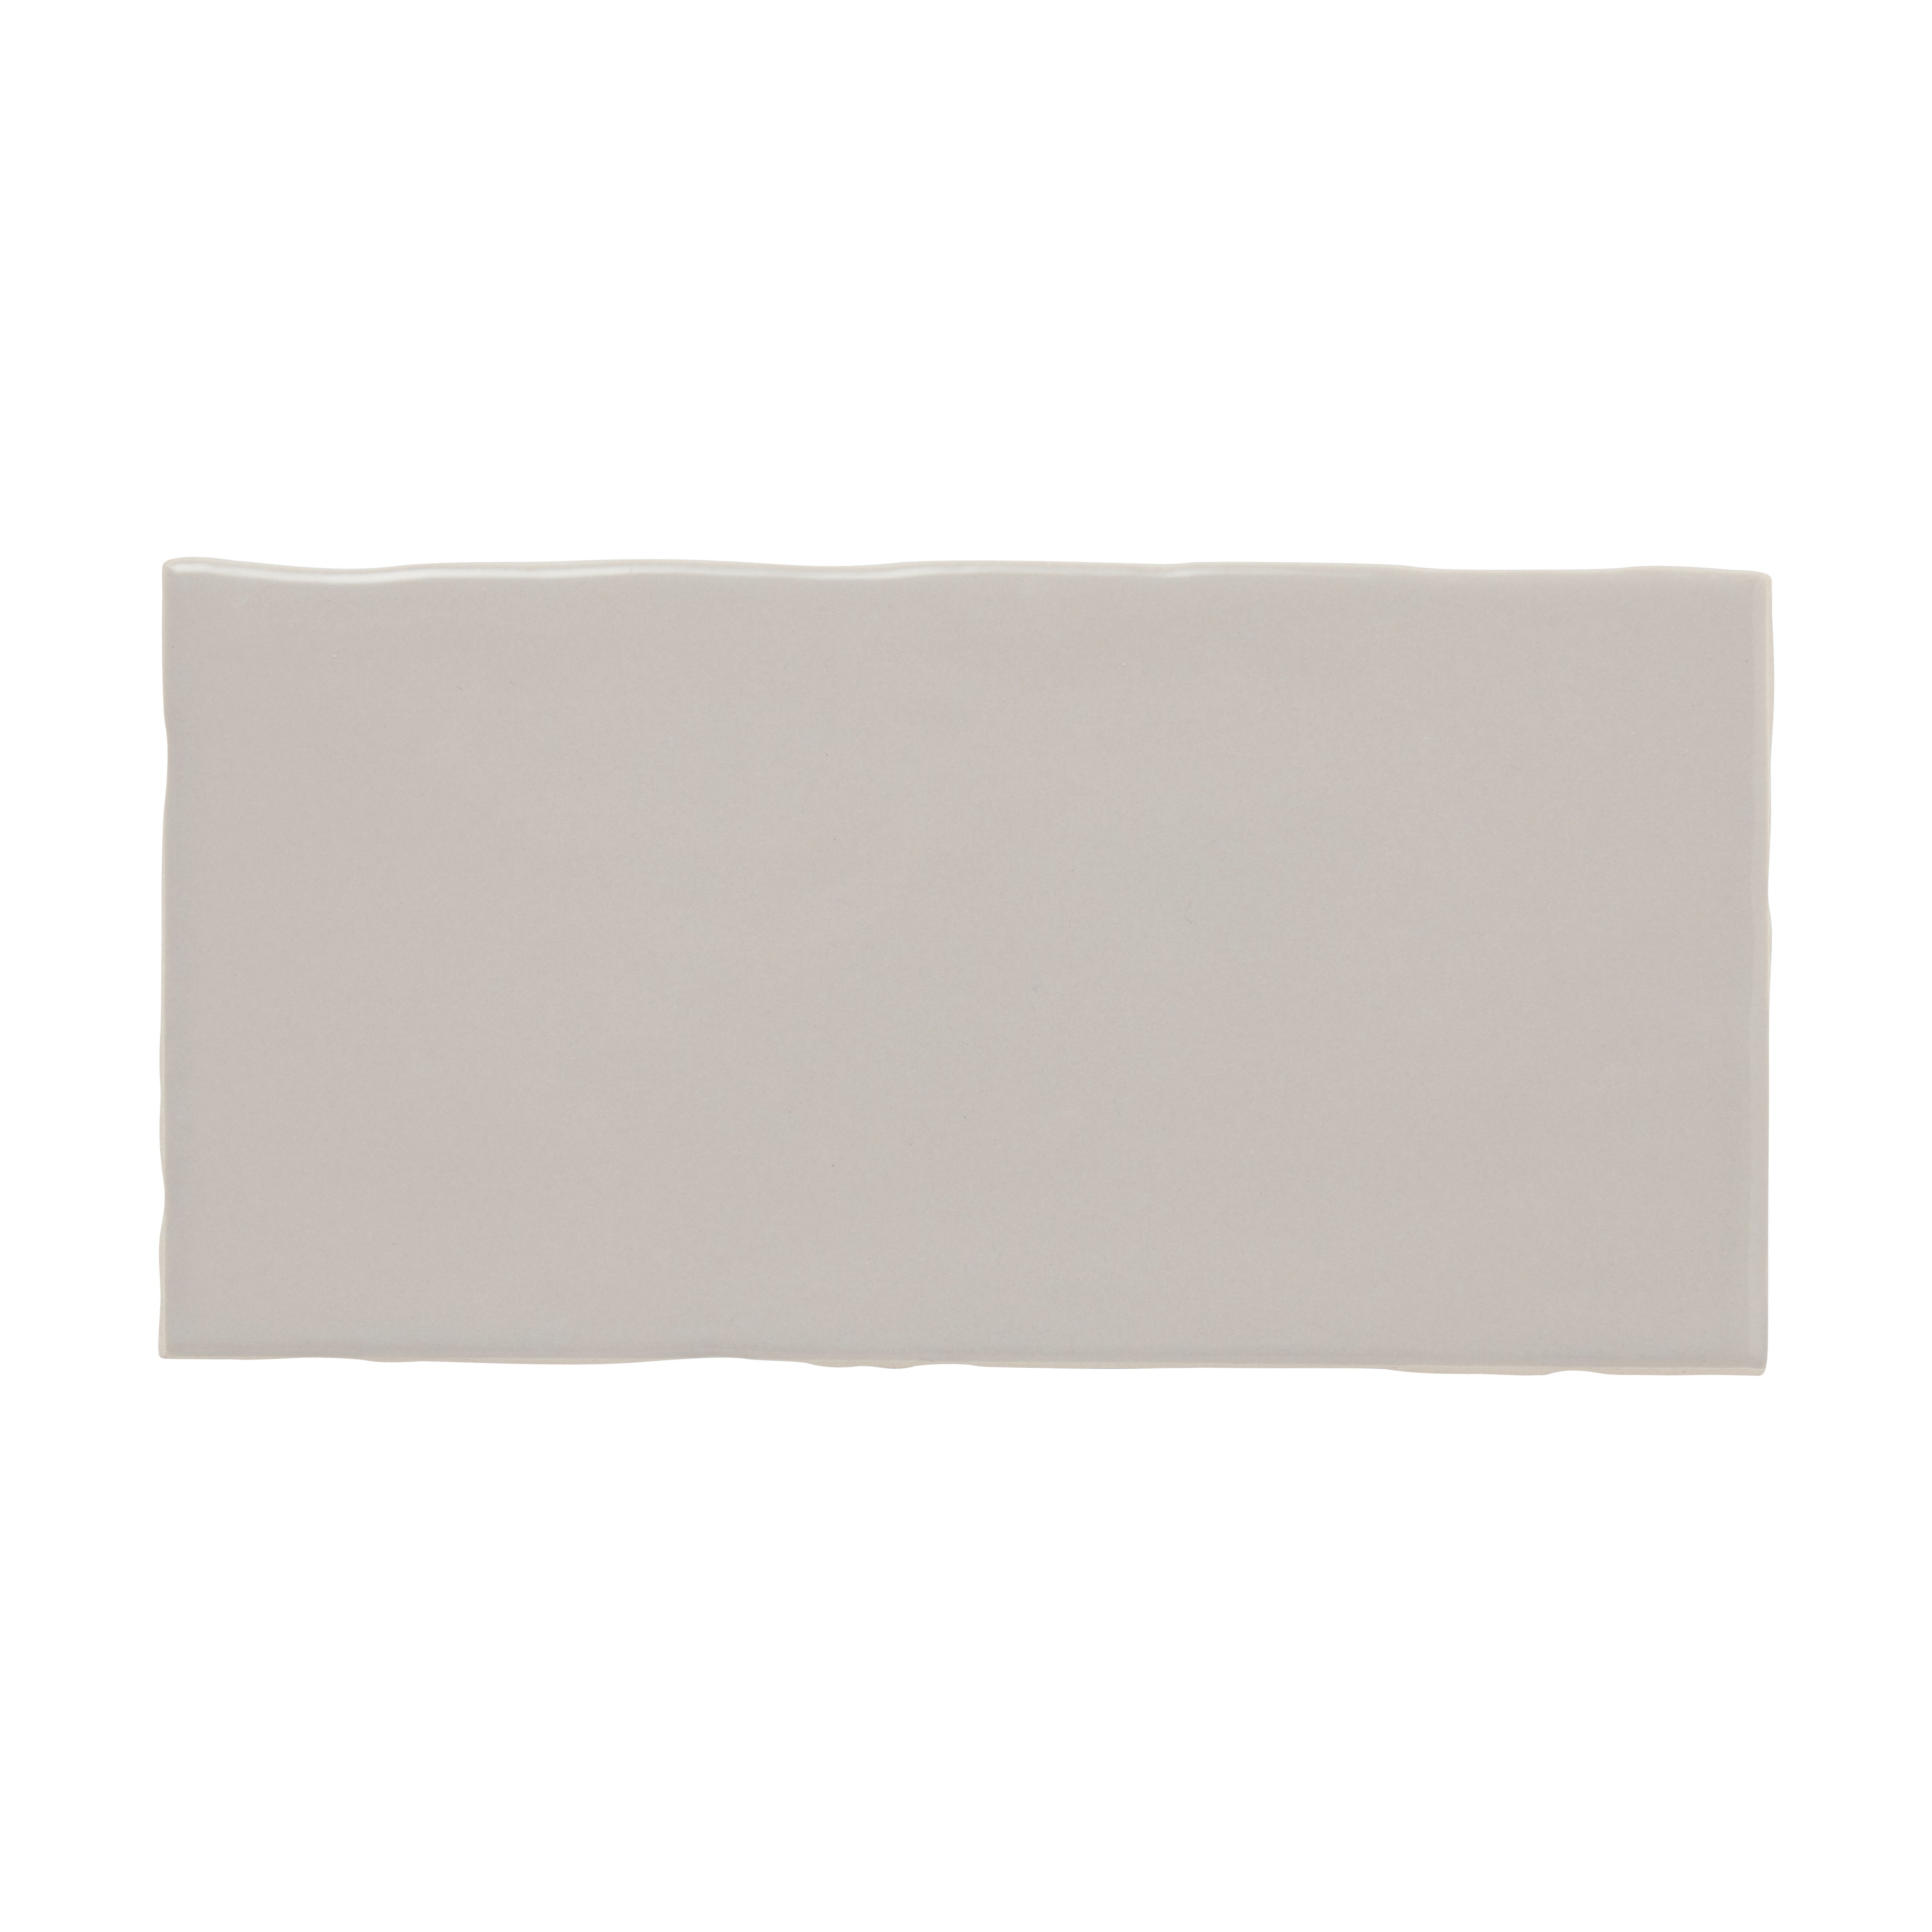 Vernisse Silver grey Gloss Plain Ceramic Indoor Wall tile, Pack of 80, (L)150mm (W)75.4mm